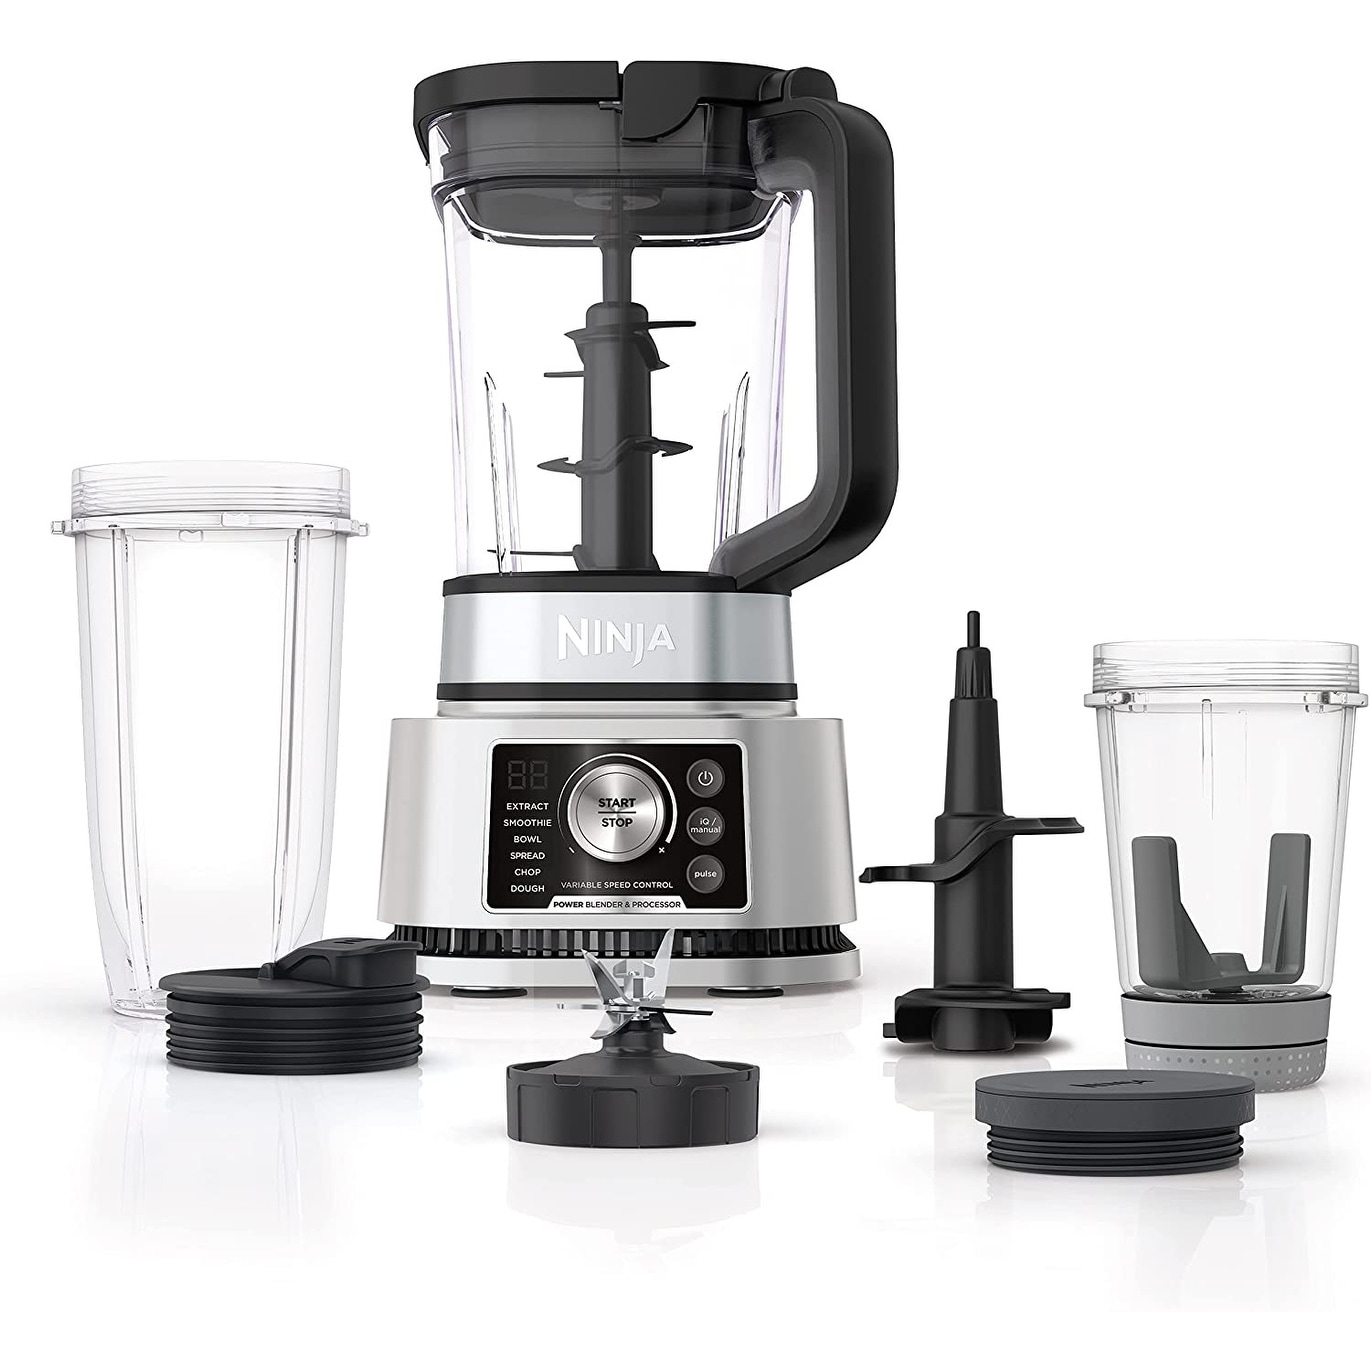 https://ak1.ostkcdn.com/images/products/is/images/direct/40bedac92a6a9289dae04a6d08f42c12c491f777/Ninja-SS351-Foodi-Power-Blender-%26-Processor-System-%28Silver%29.jpg